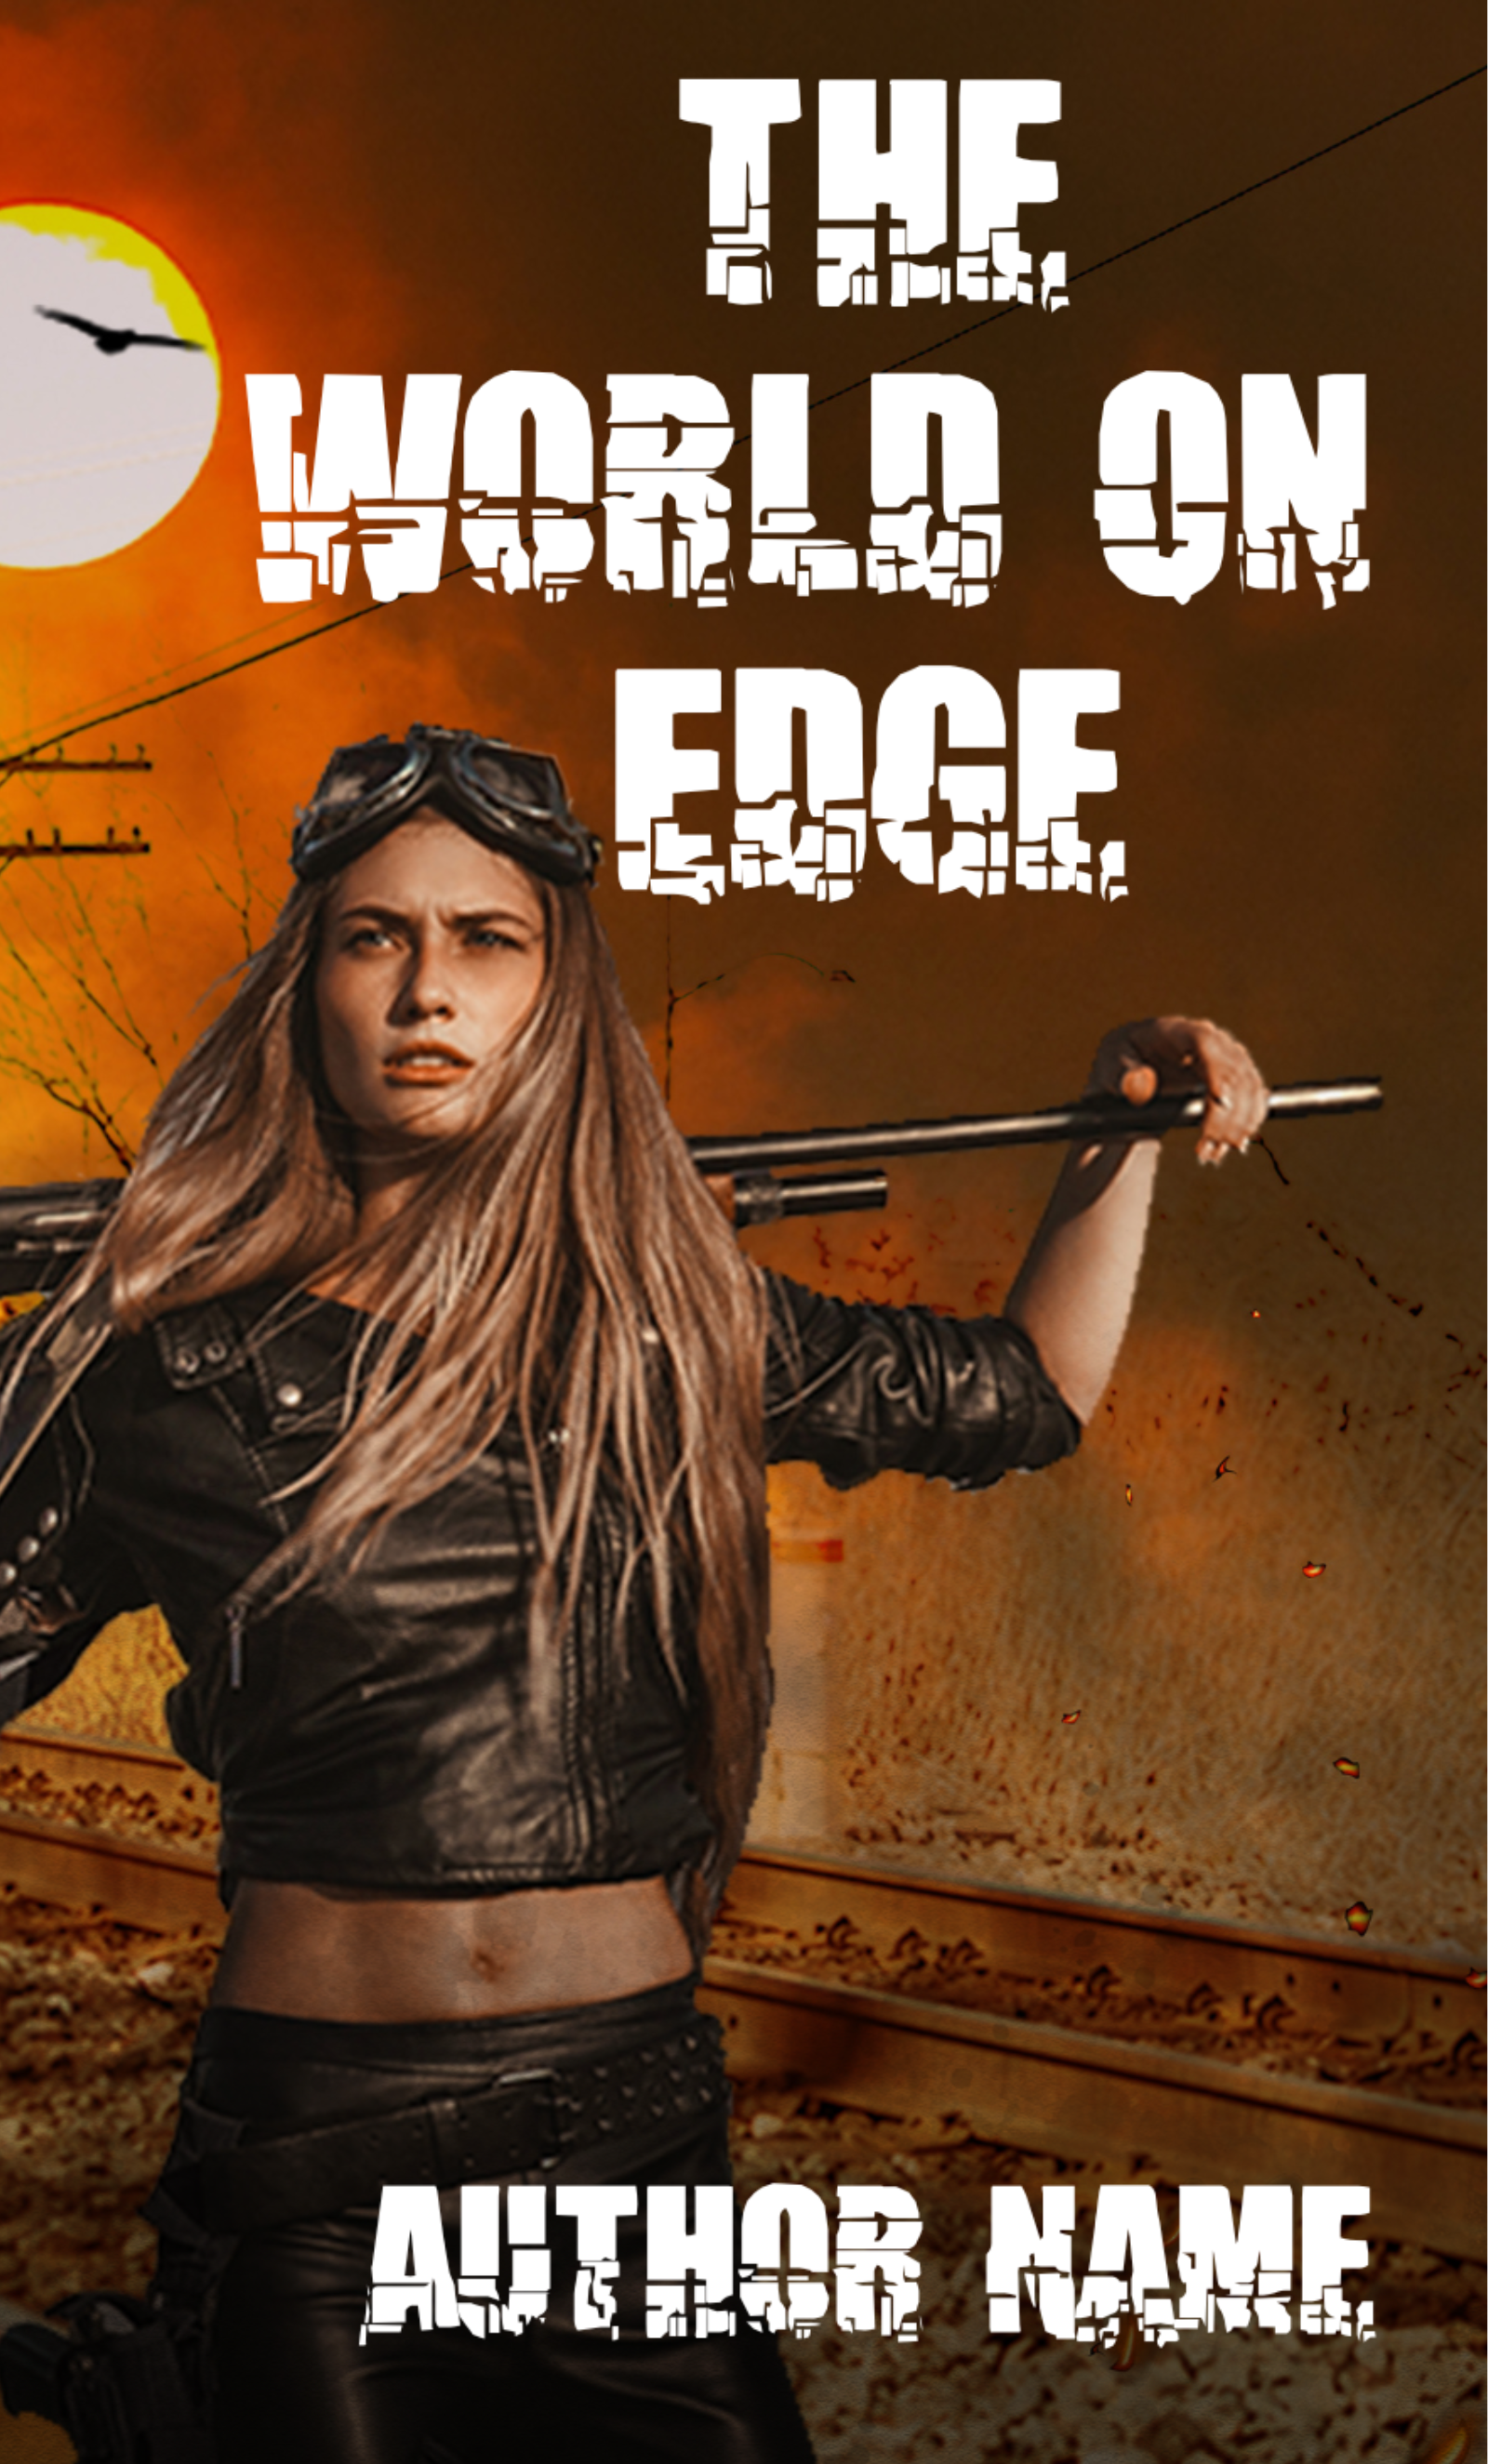 A woman in a leather outfit and goggles holds a shotgun against a dramatic orange sky. A partially obscured sun and darkened train tracks are in the background. The title "THE WORLD ON EDGE" is in distressed, bold text at the top. "KAREN BARNETT" is at the bottom in similar font. BookSelf Book Cover Design & Premade Book Covers